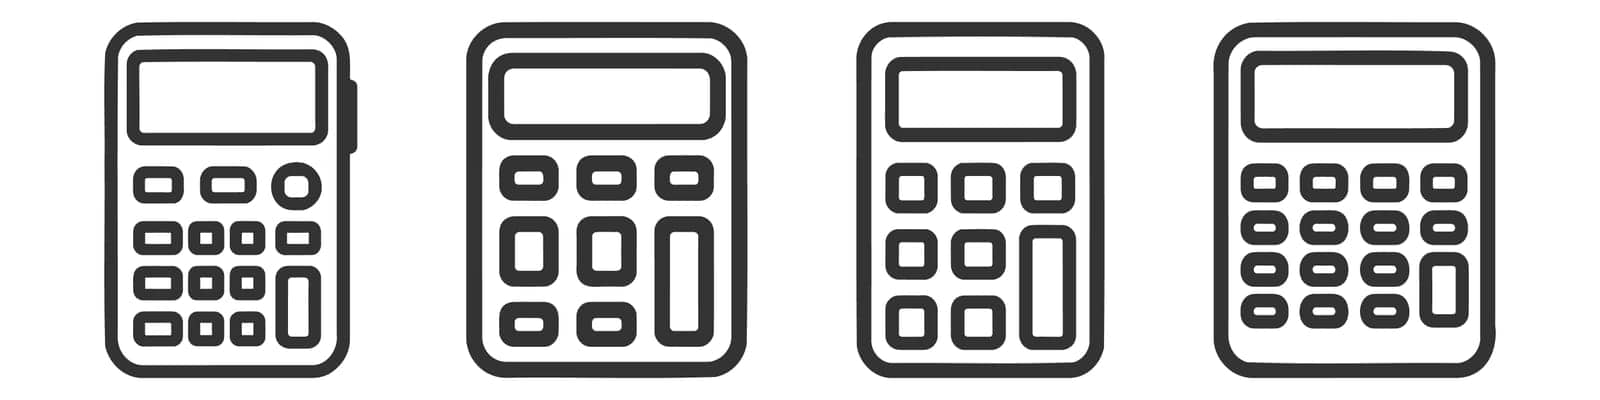 Calculator icon vector set, collection, pack. Savings, finances sign isolated on white, economy concept.